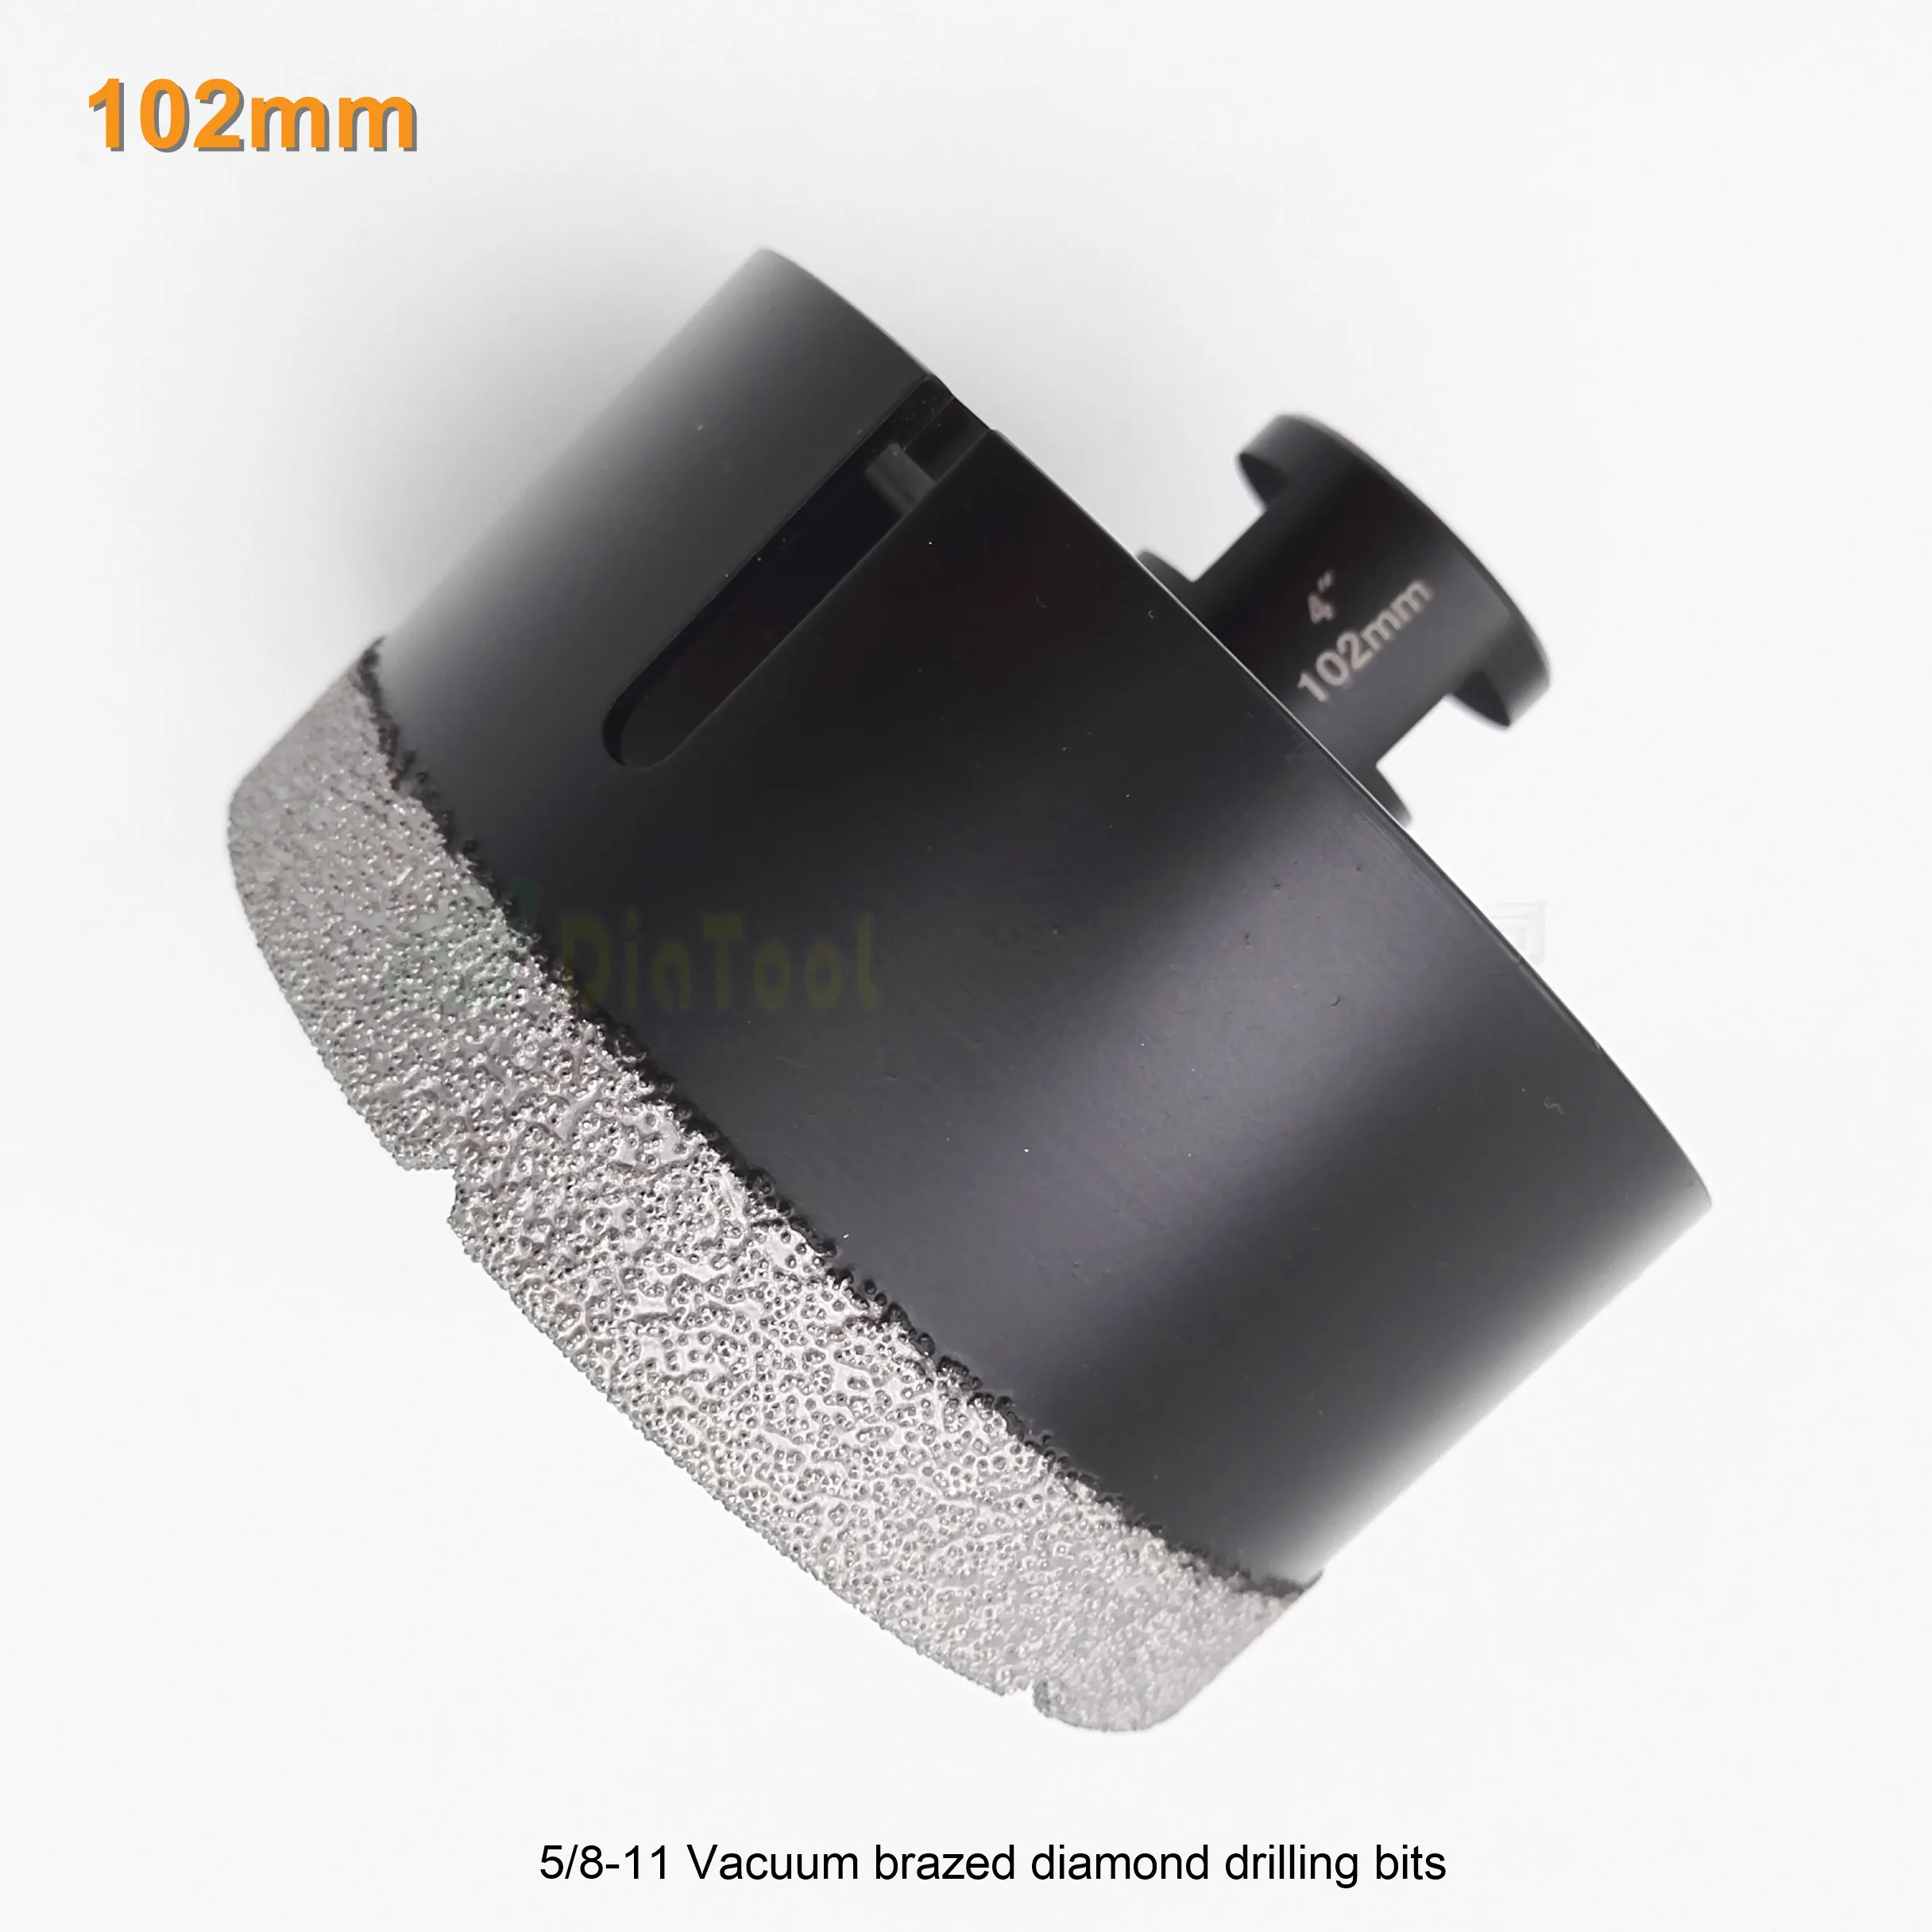 DIATOOL Diameter 102mm 4" Vacuum Brazed Diamond Dry Drilling Bits 5/8-11 Connection Drill Core Bits For Grantie Marble Tile